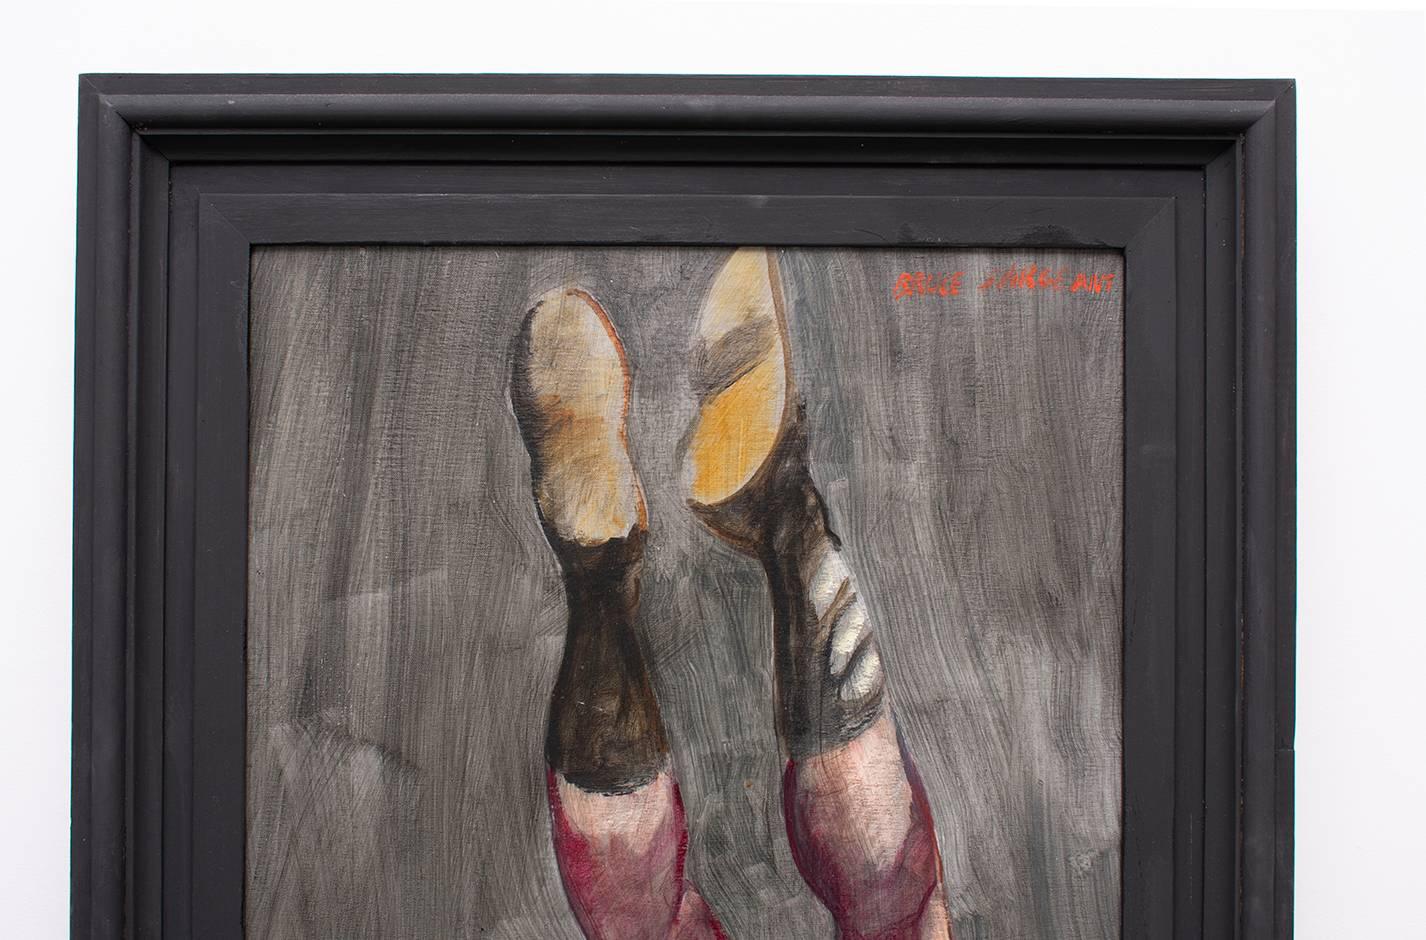 Handstand (Large Figurative Painting on Canvas of an Athlete and a Girl) 2